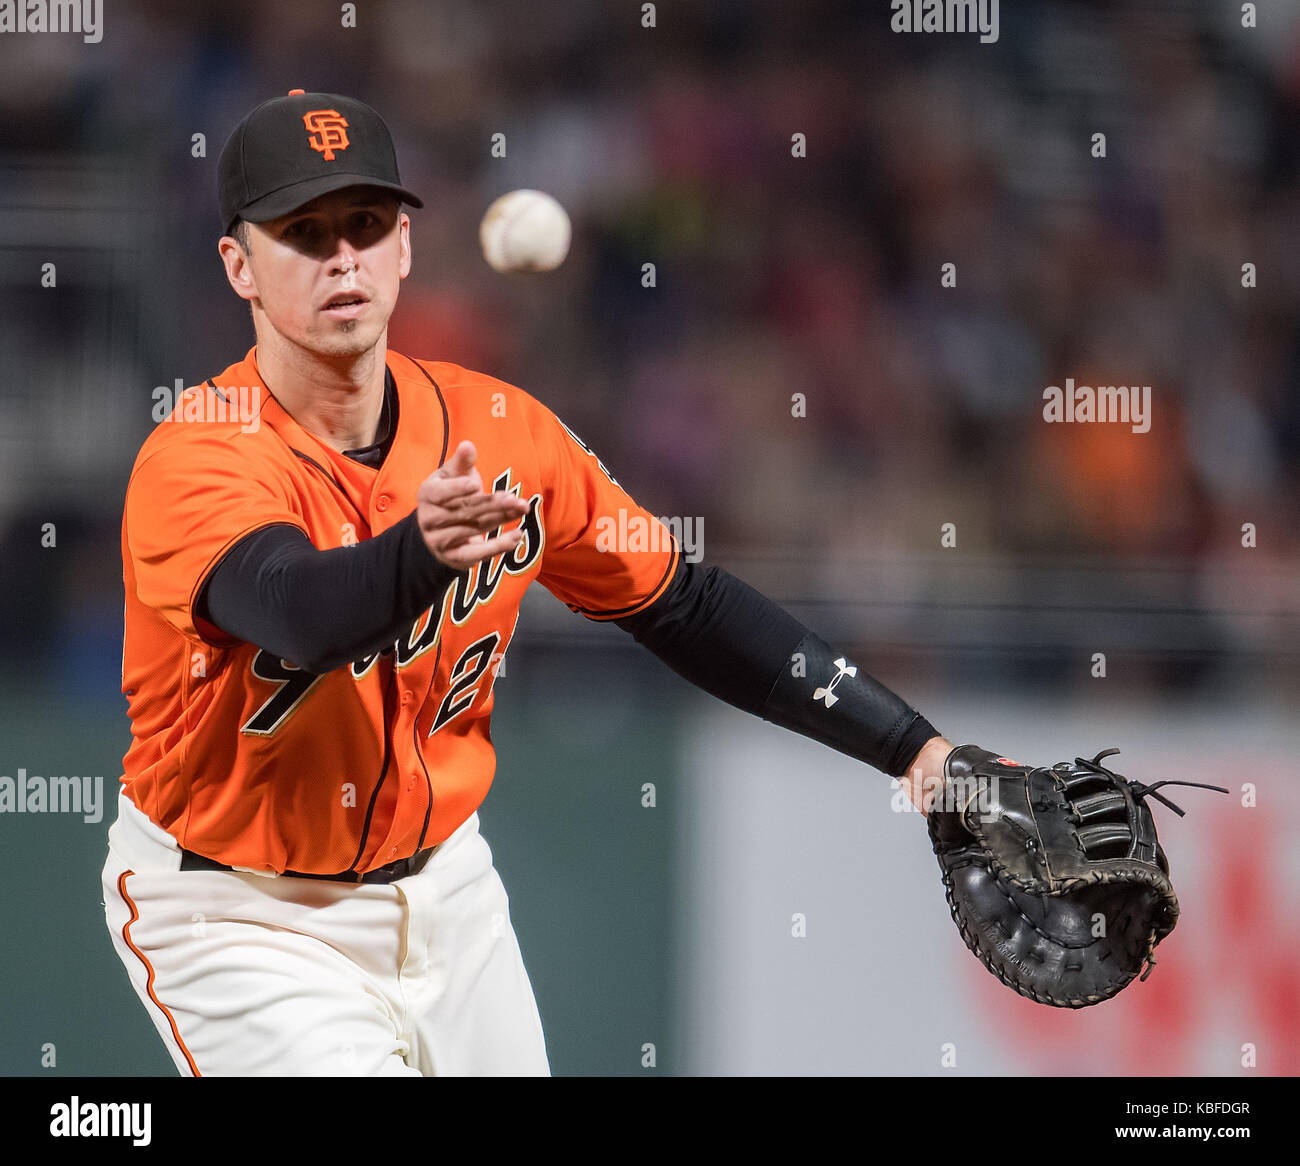 San Francisco, California, USA. 29th Sep, 2017. San Francisco Giants first baseman Buster Posey (28) makes a toss Chris Stratton (not shown) to end the second inning, during a MLB game between the San Diego Padres and the San Francisco Giants at AT&T Park in San Francisco, California. Valerie Shoaps/CSM/Alamy Live News Stock Photo